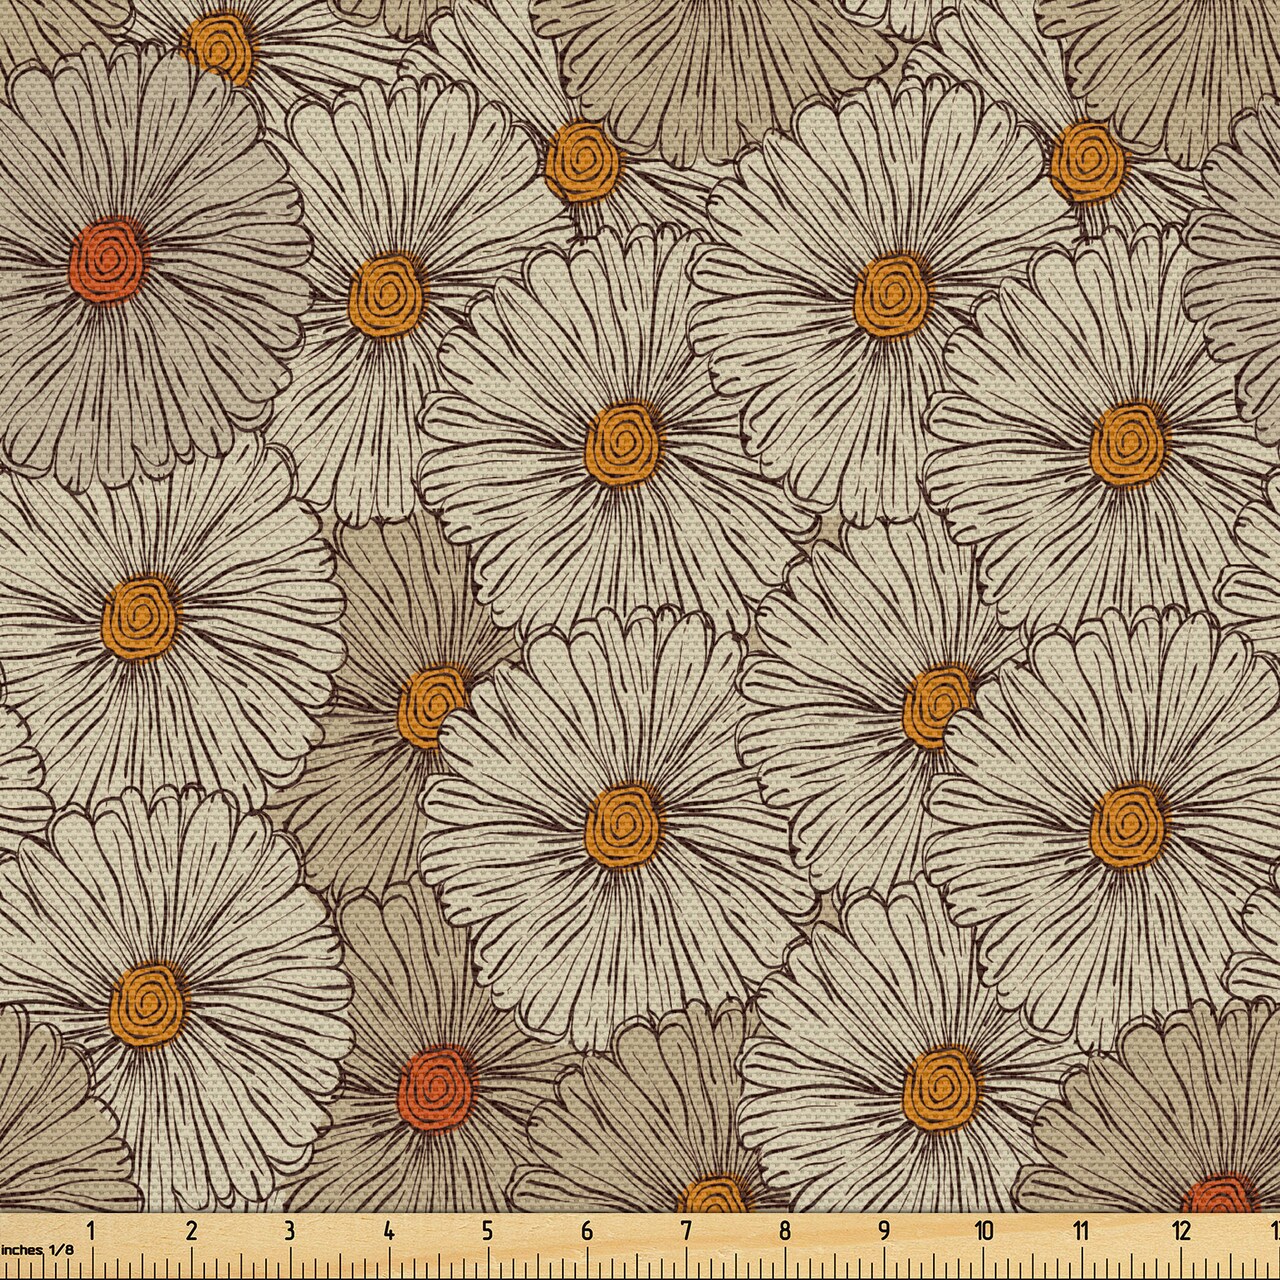 Ambesonne Vintage Fabric by the Yard, Sketch Art Style Gerbera Daisies Abstract Flowers Autumn Garden Flourish, Decorative Fabric for Upholstery and Home Accents, 3 Yards, Tan Orange Marigold